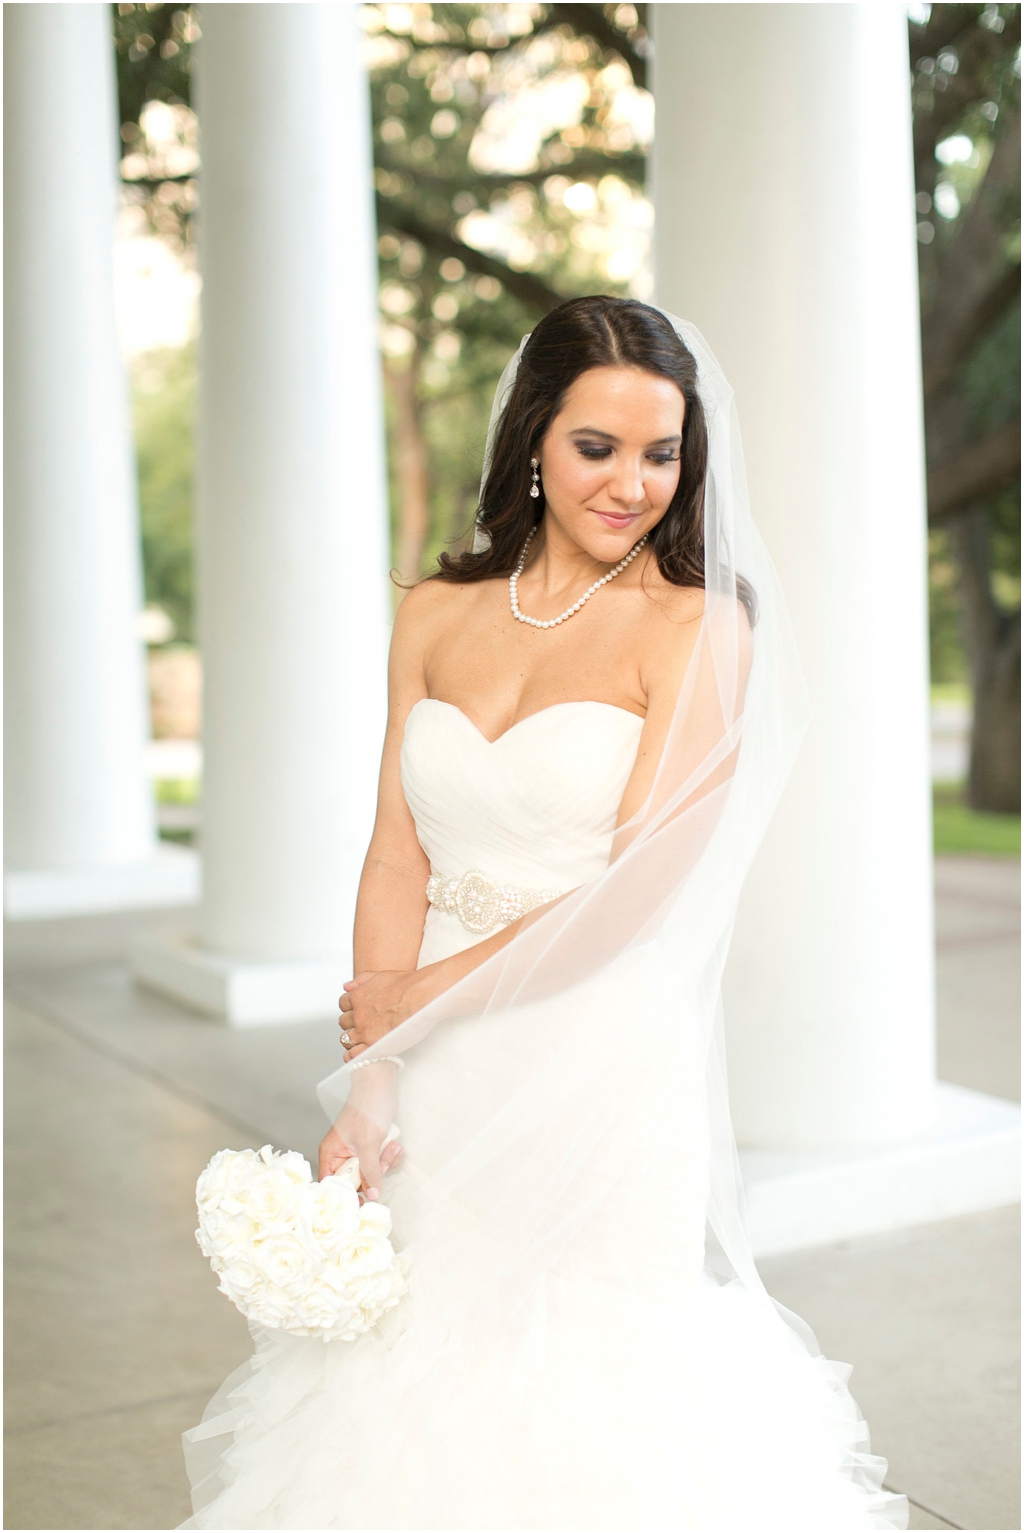 View More: http://maryfieldsphotography.pass.us/sparks-bridals-2014